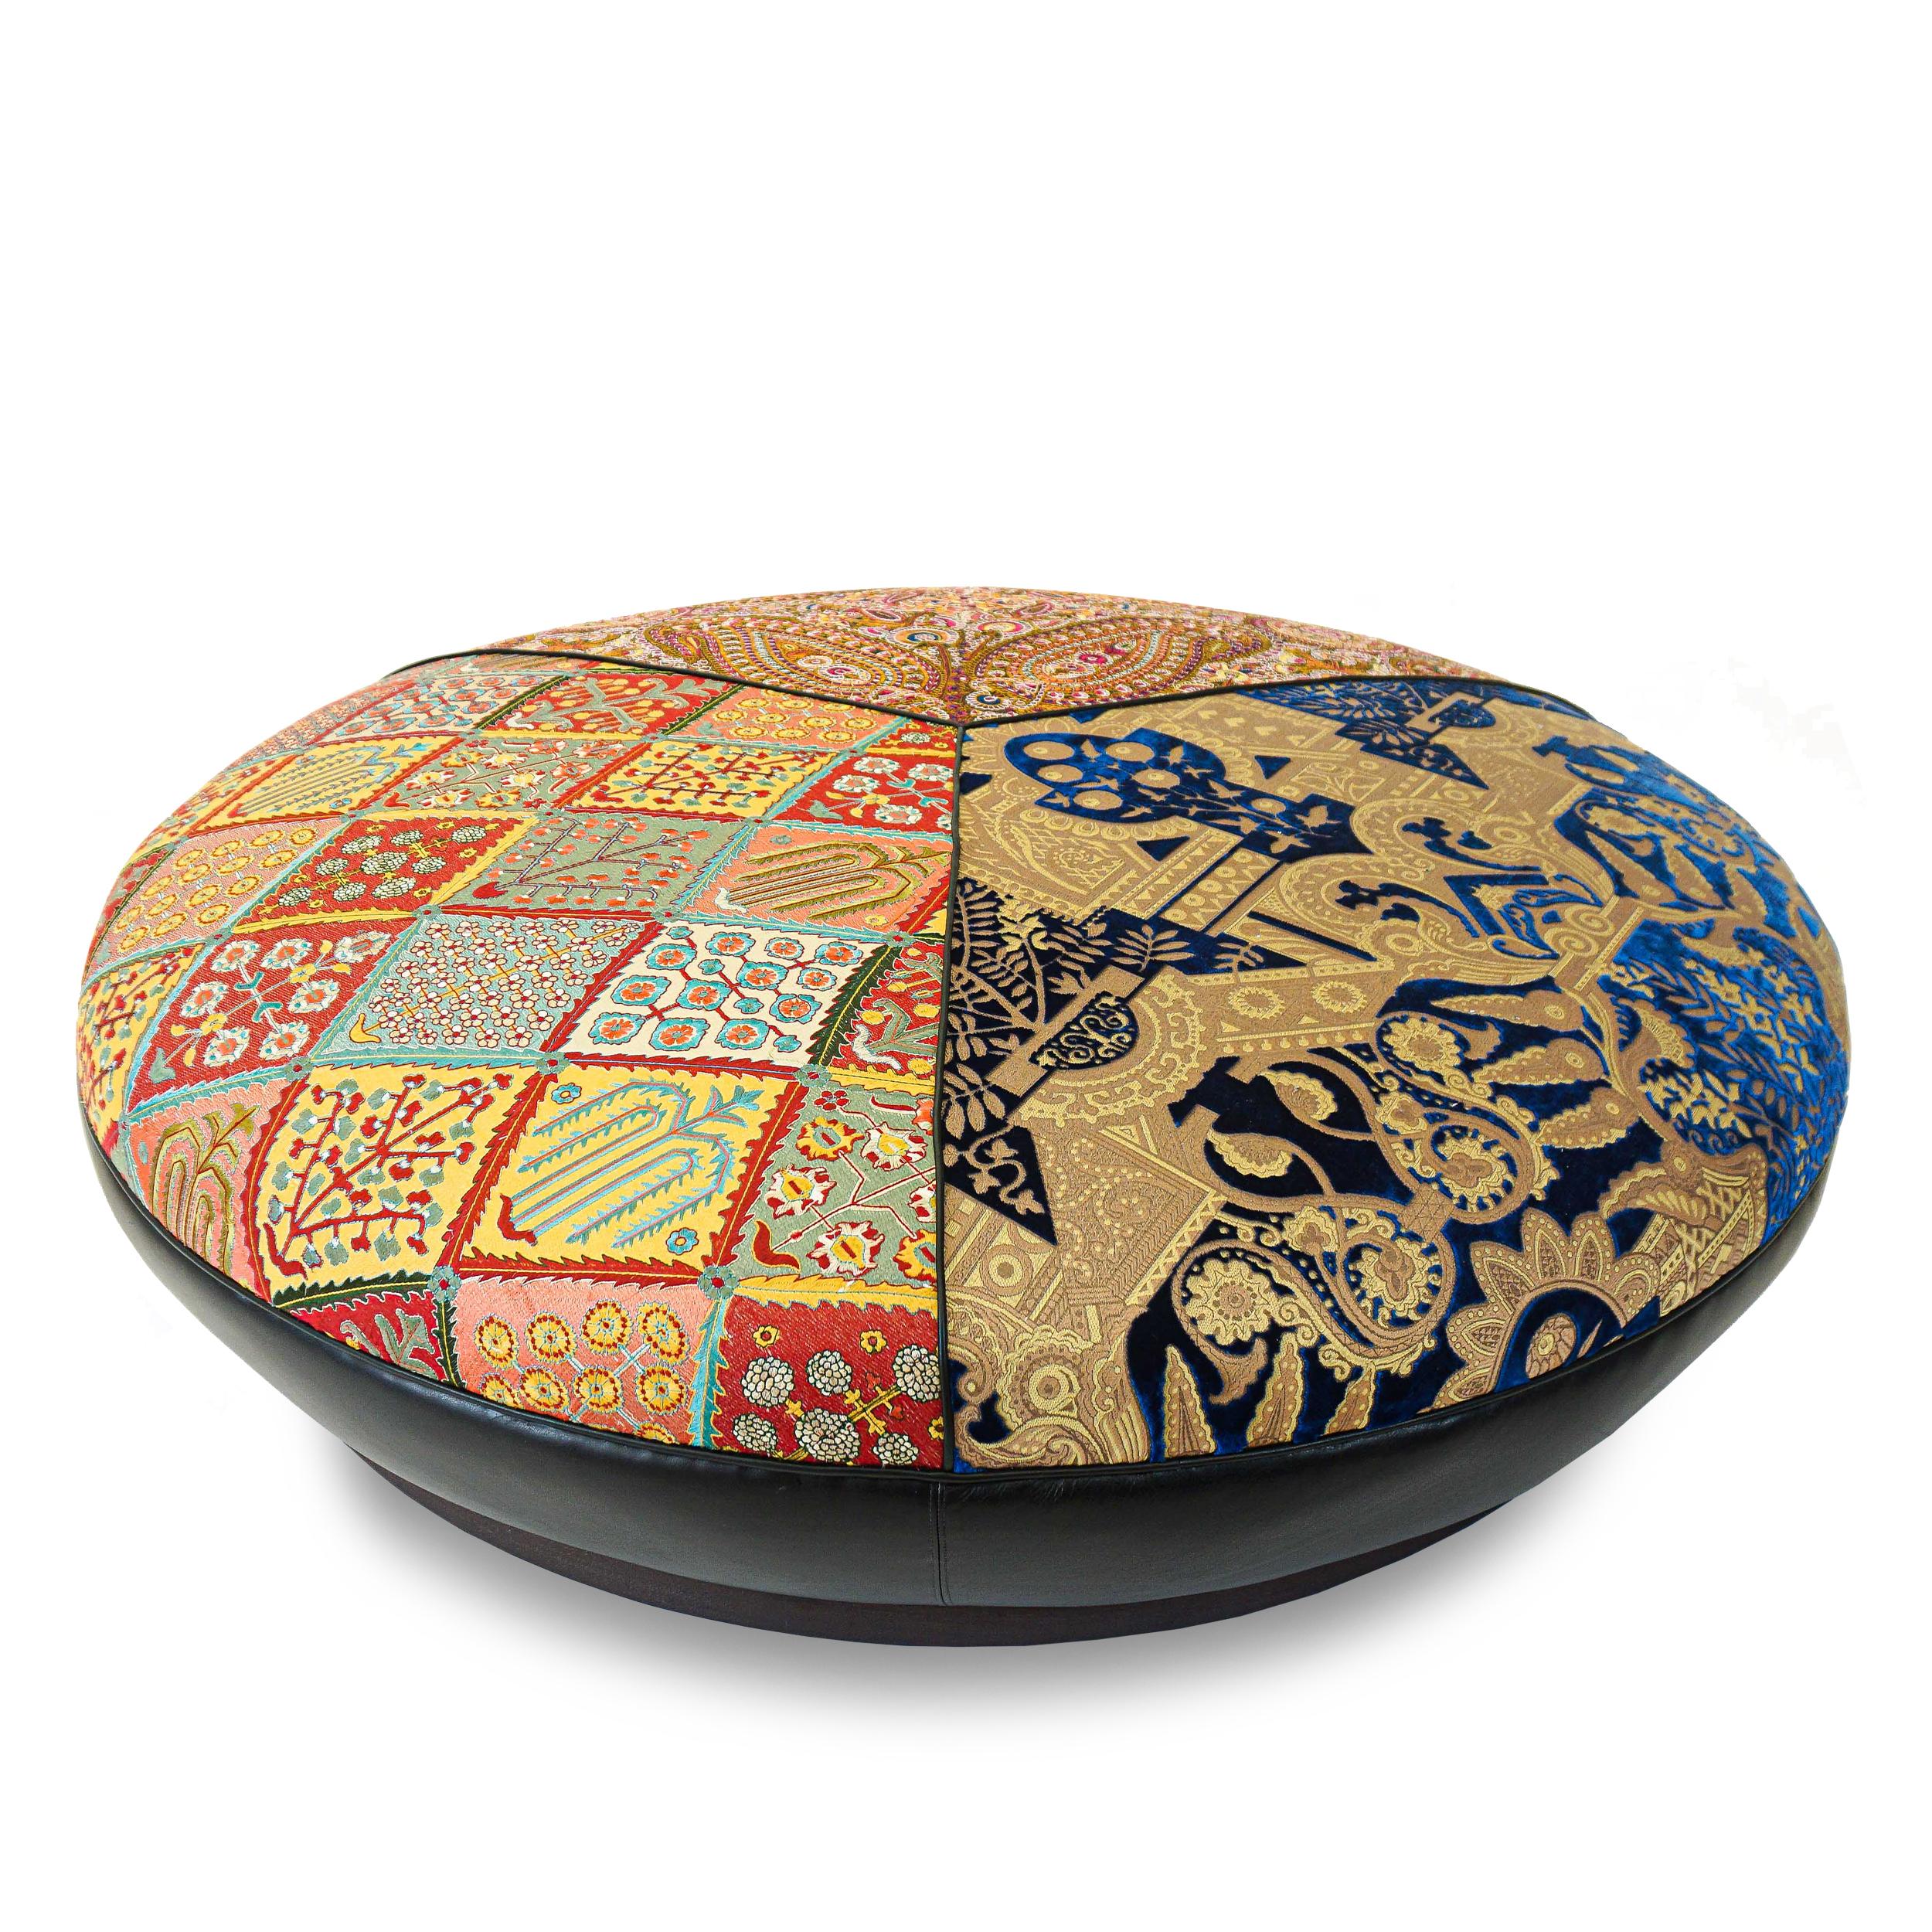 Large Round Upholstered Moroccan-Inspired Ottoman, Customizable In New Condition For Sale In Greenwich, CT